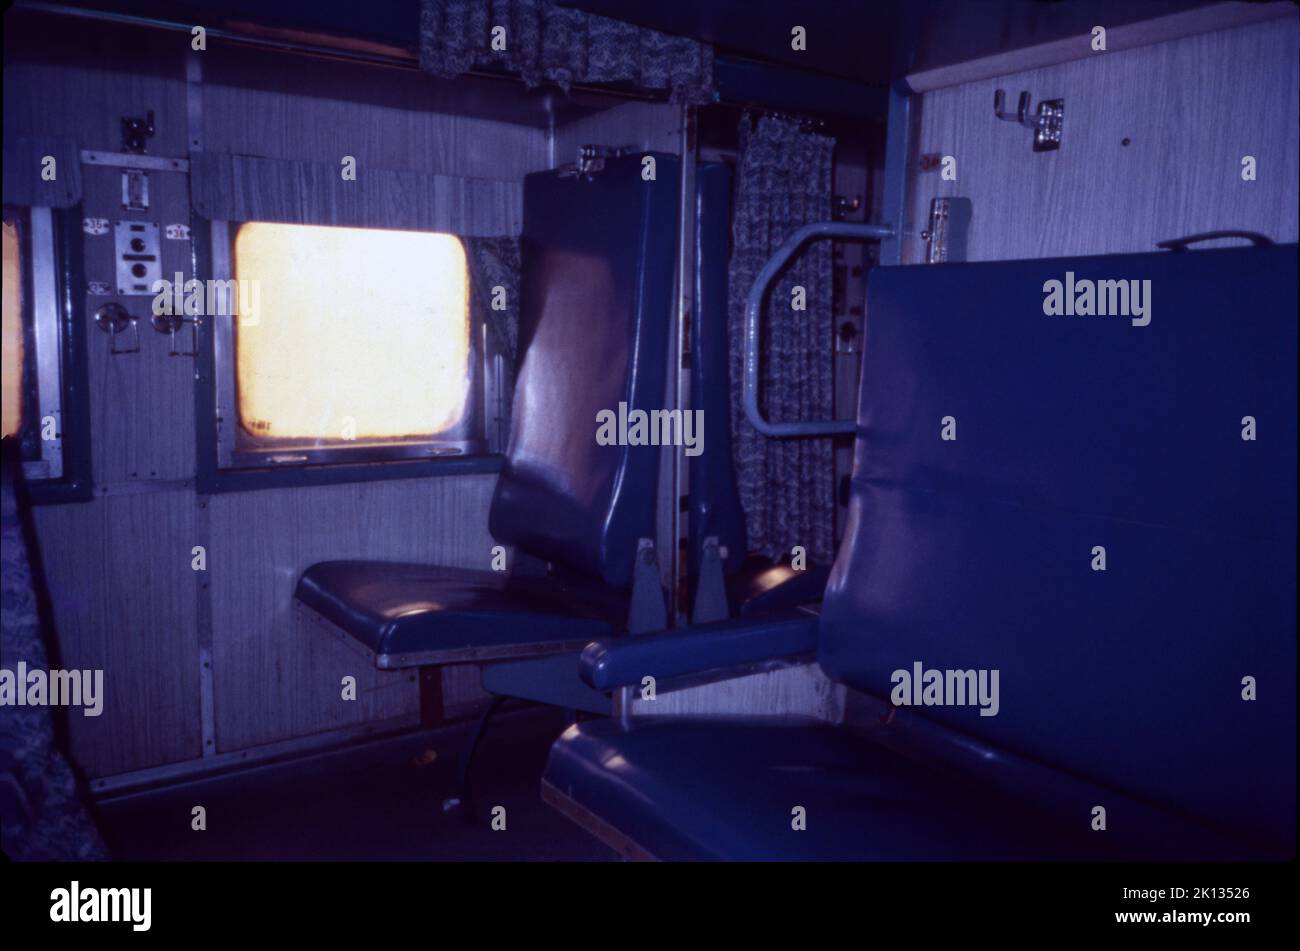 Indian Railway Compartment. Stock Photo